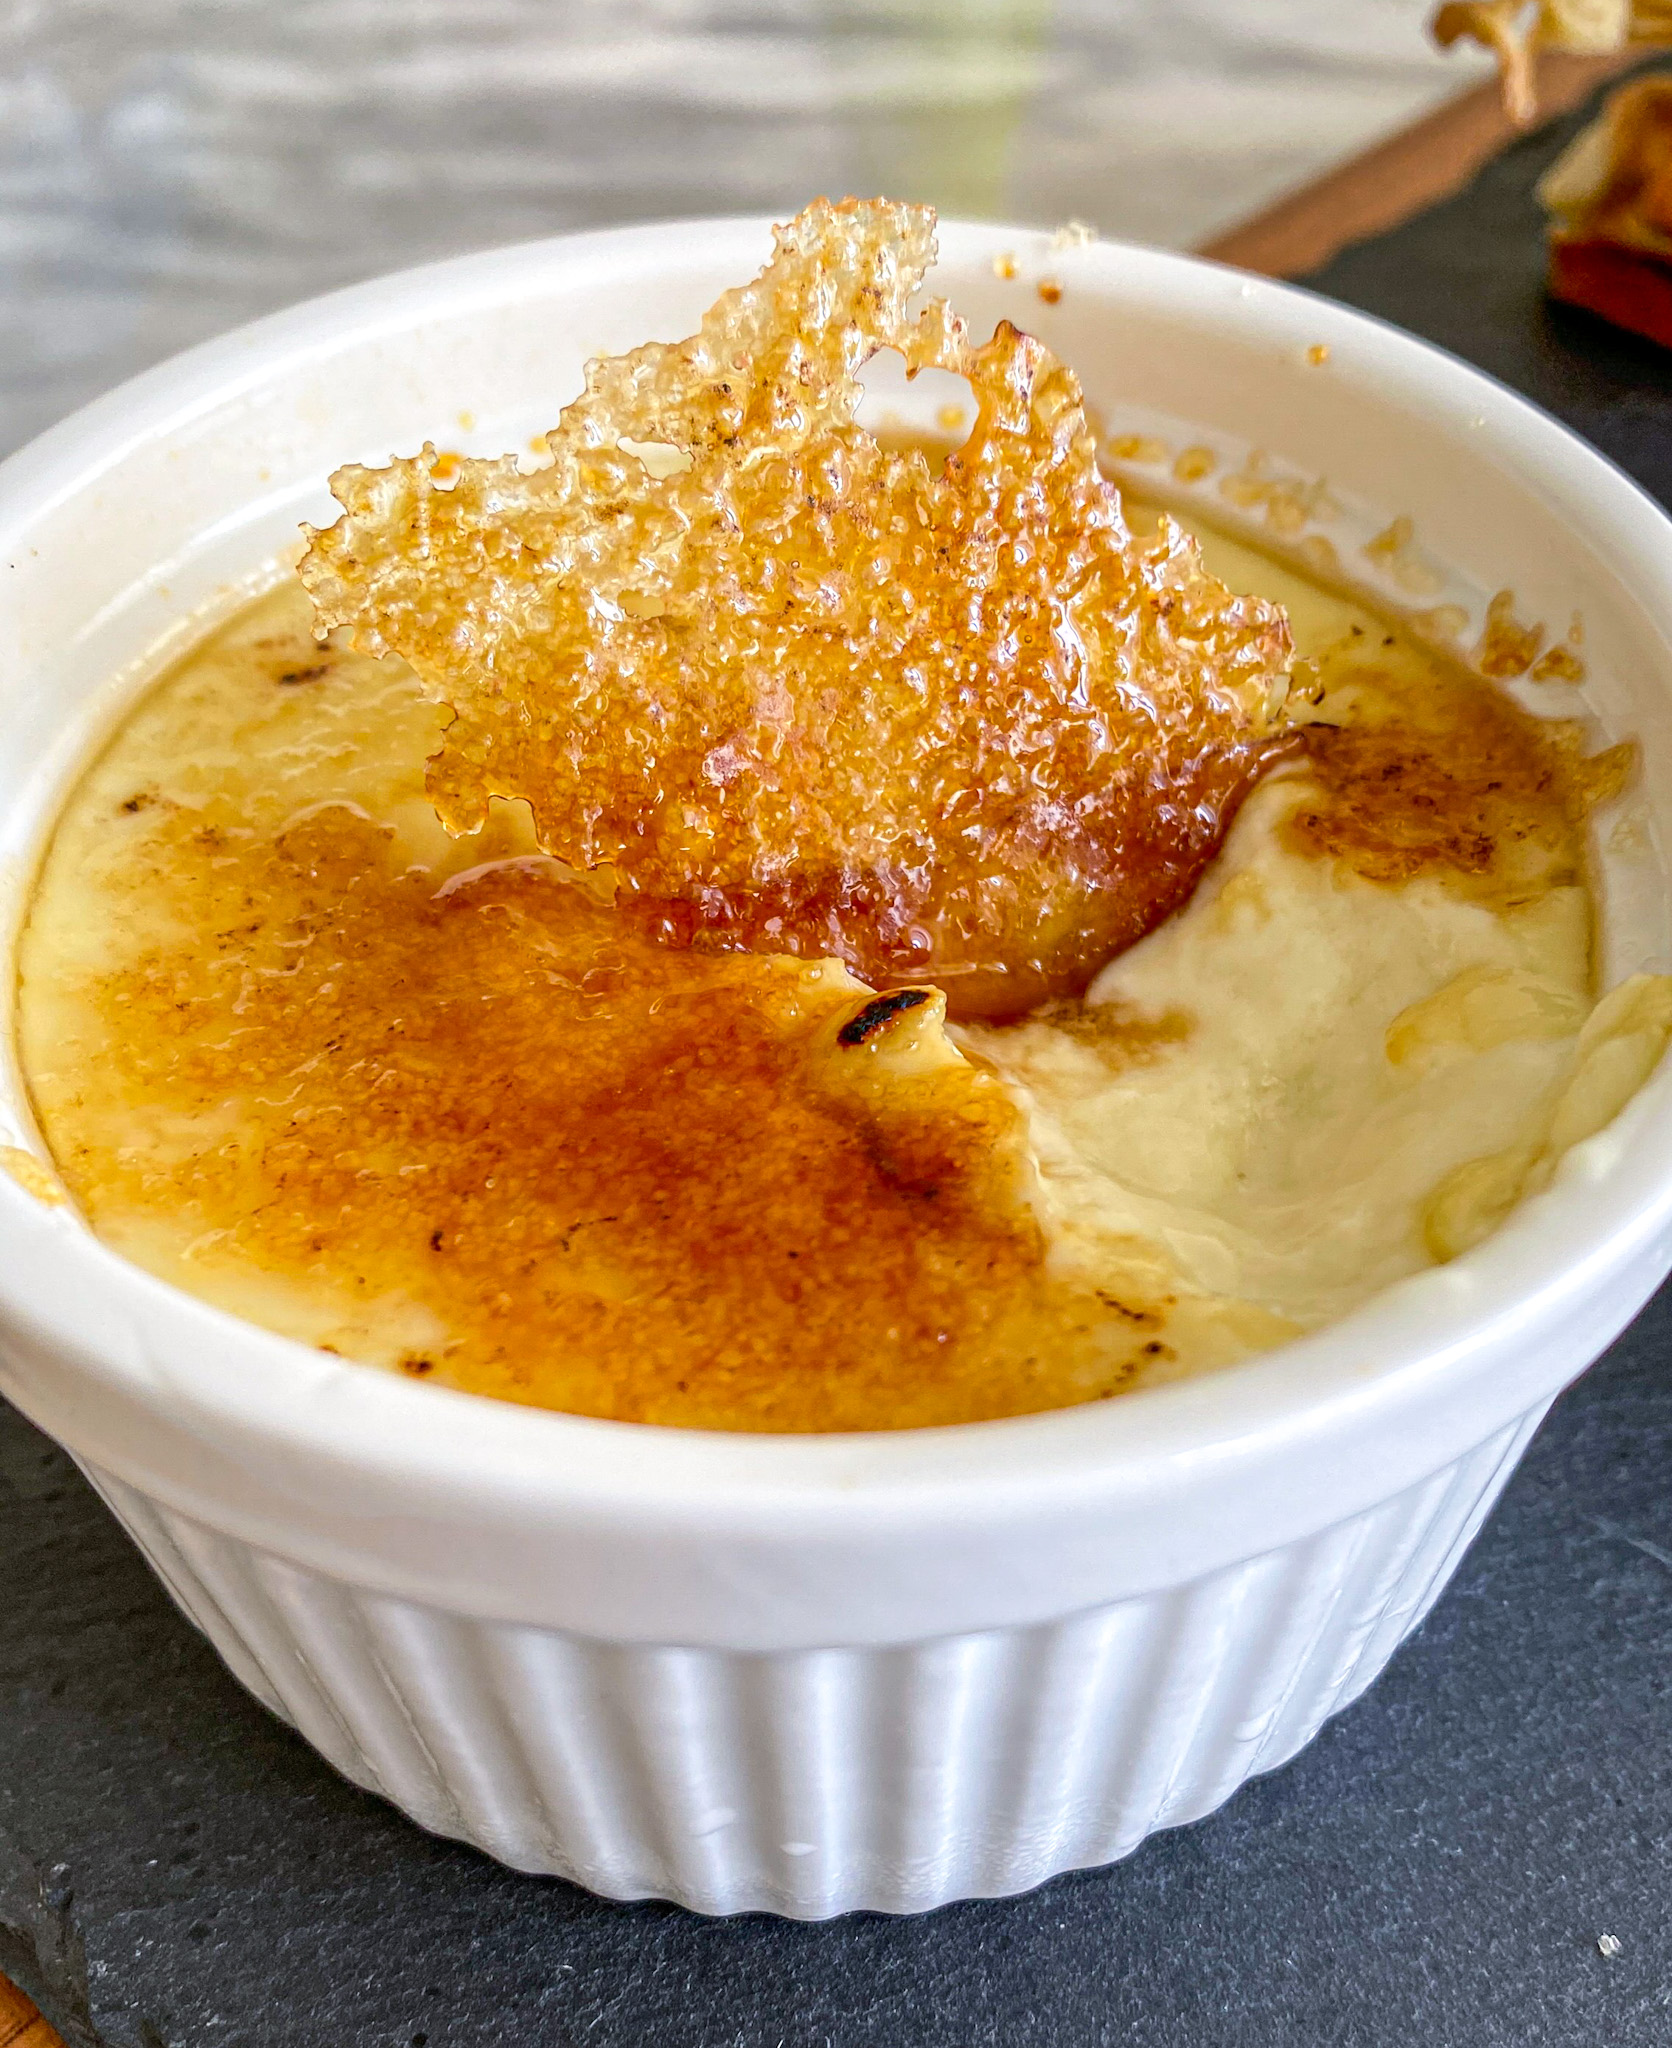 Indulge in Dairy-Free Deliciousness with My Vegan Crème Brûlée Recipe